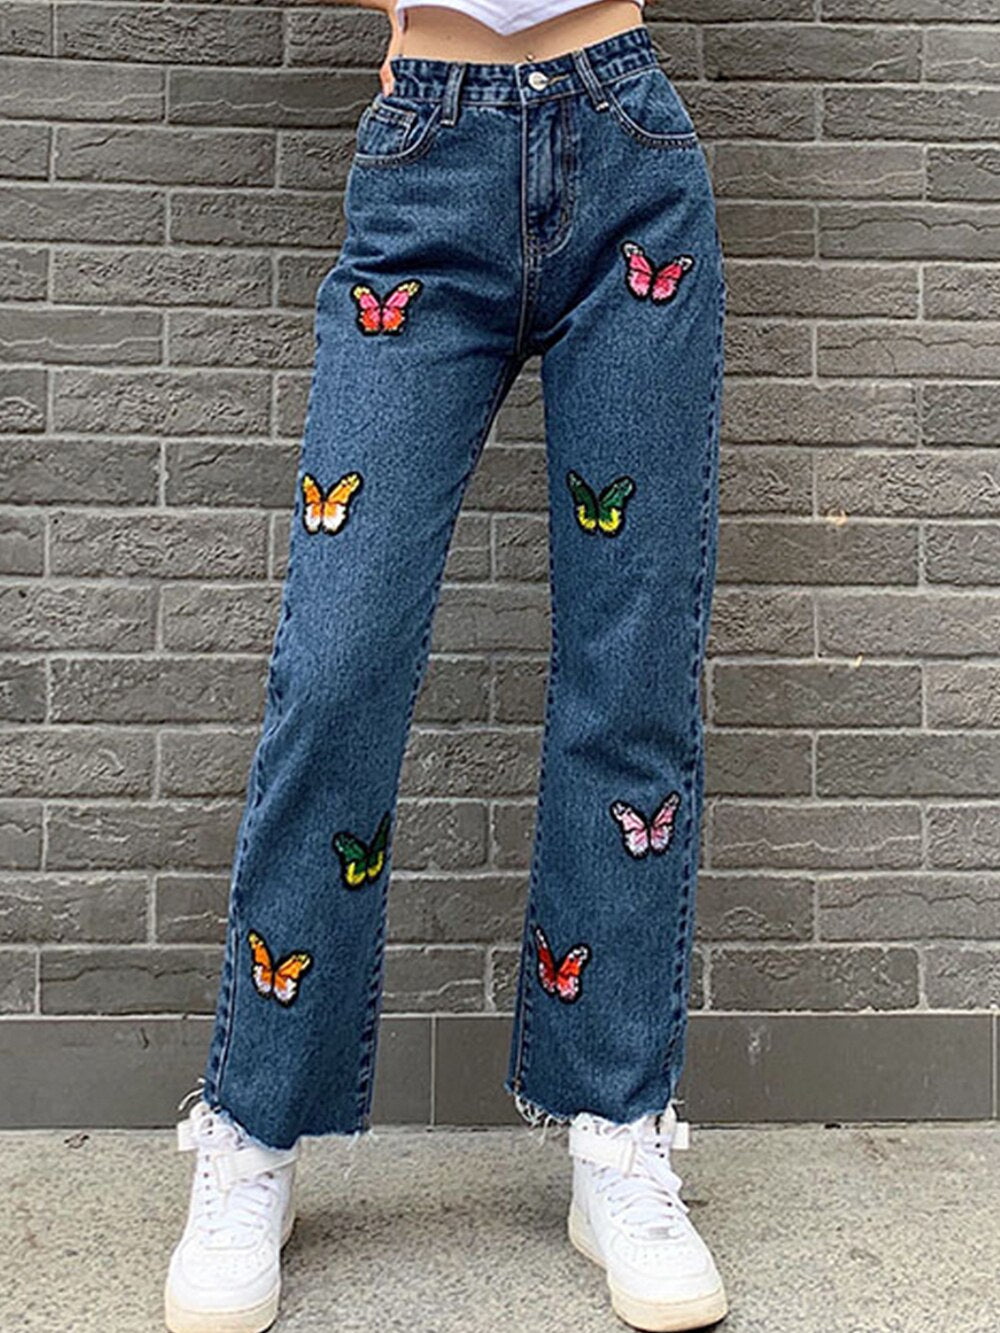 Butterfly Embroidery Women Jeans Summer Autumn Vintage Long Pant High Waist Denim Trousers Casual Straight Female Jeans Cute